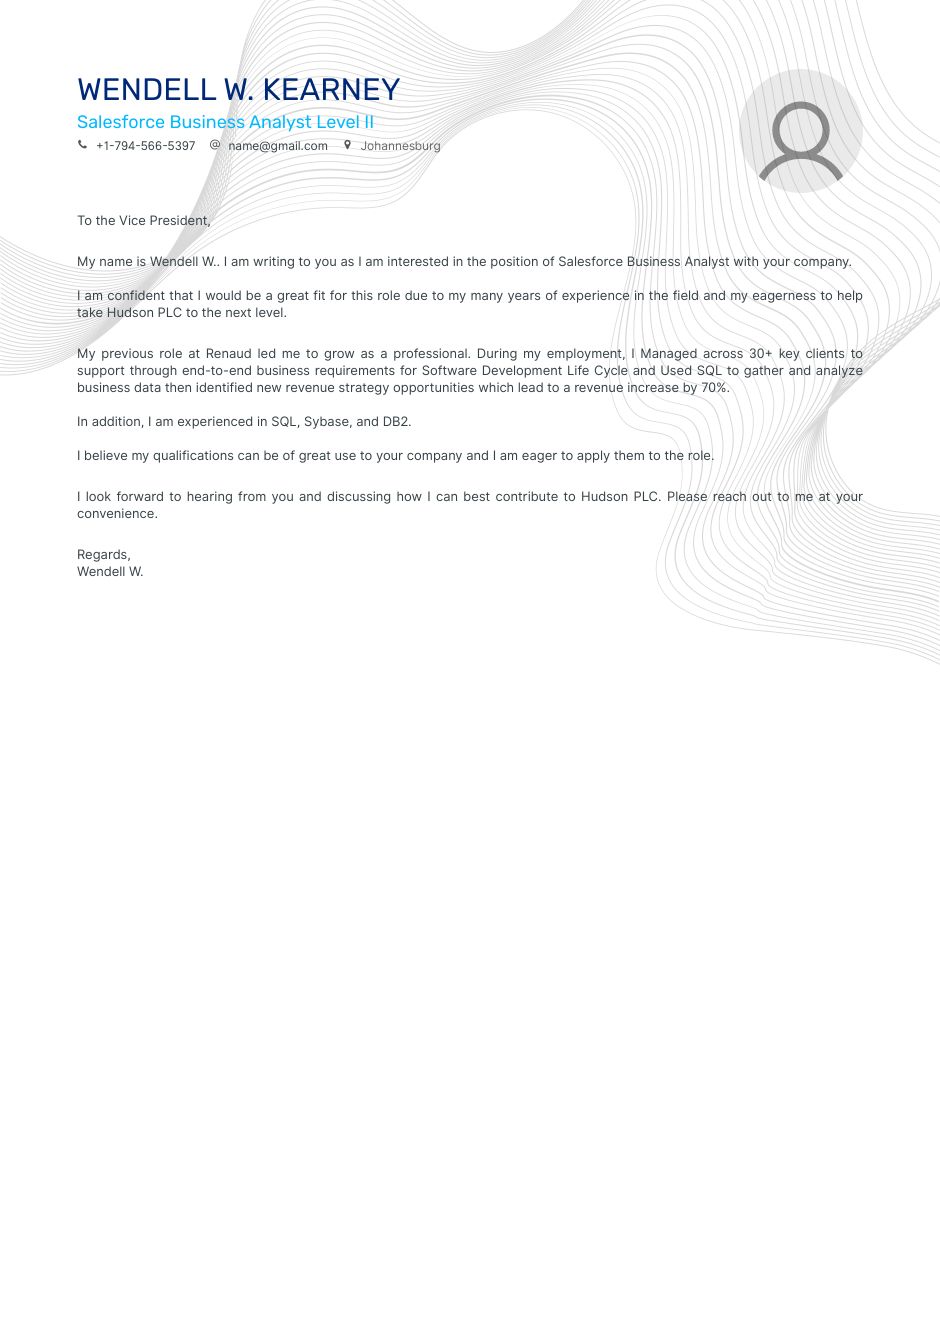 salesforce-business-analyst-coverletter.png